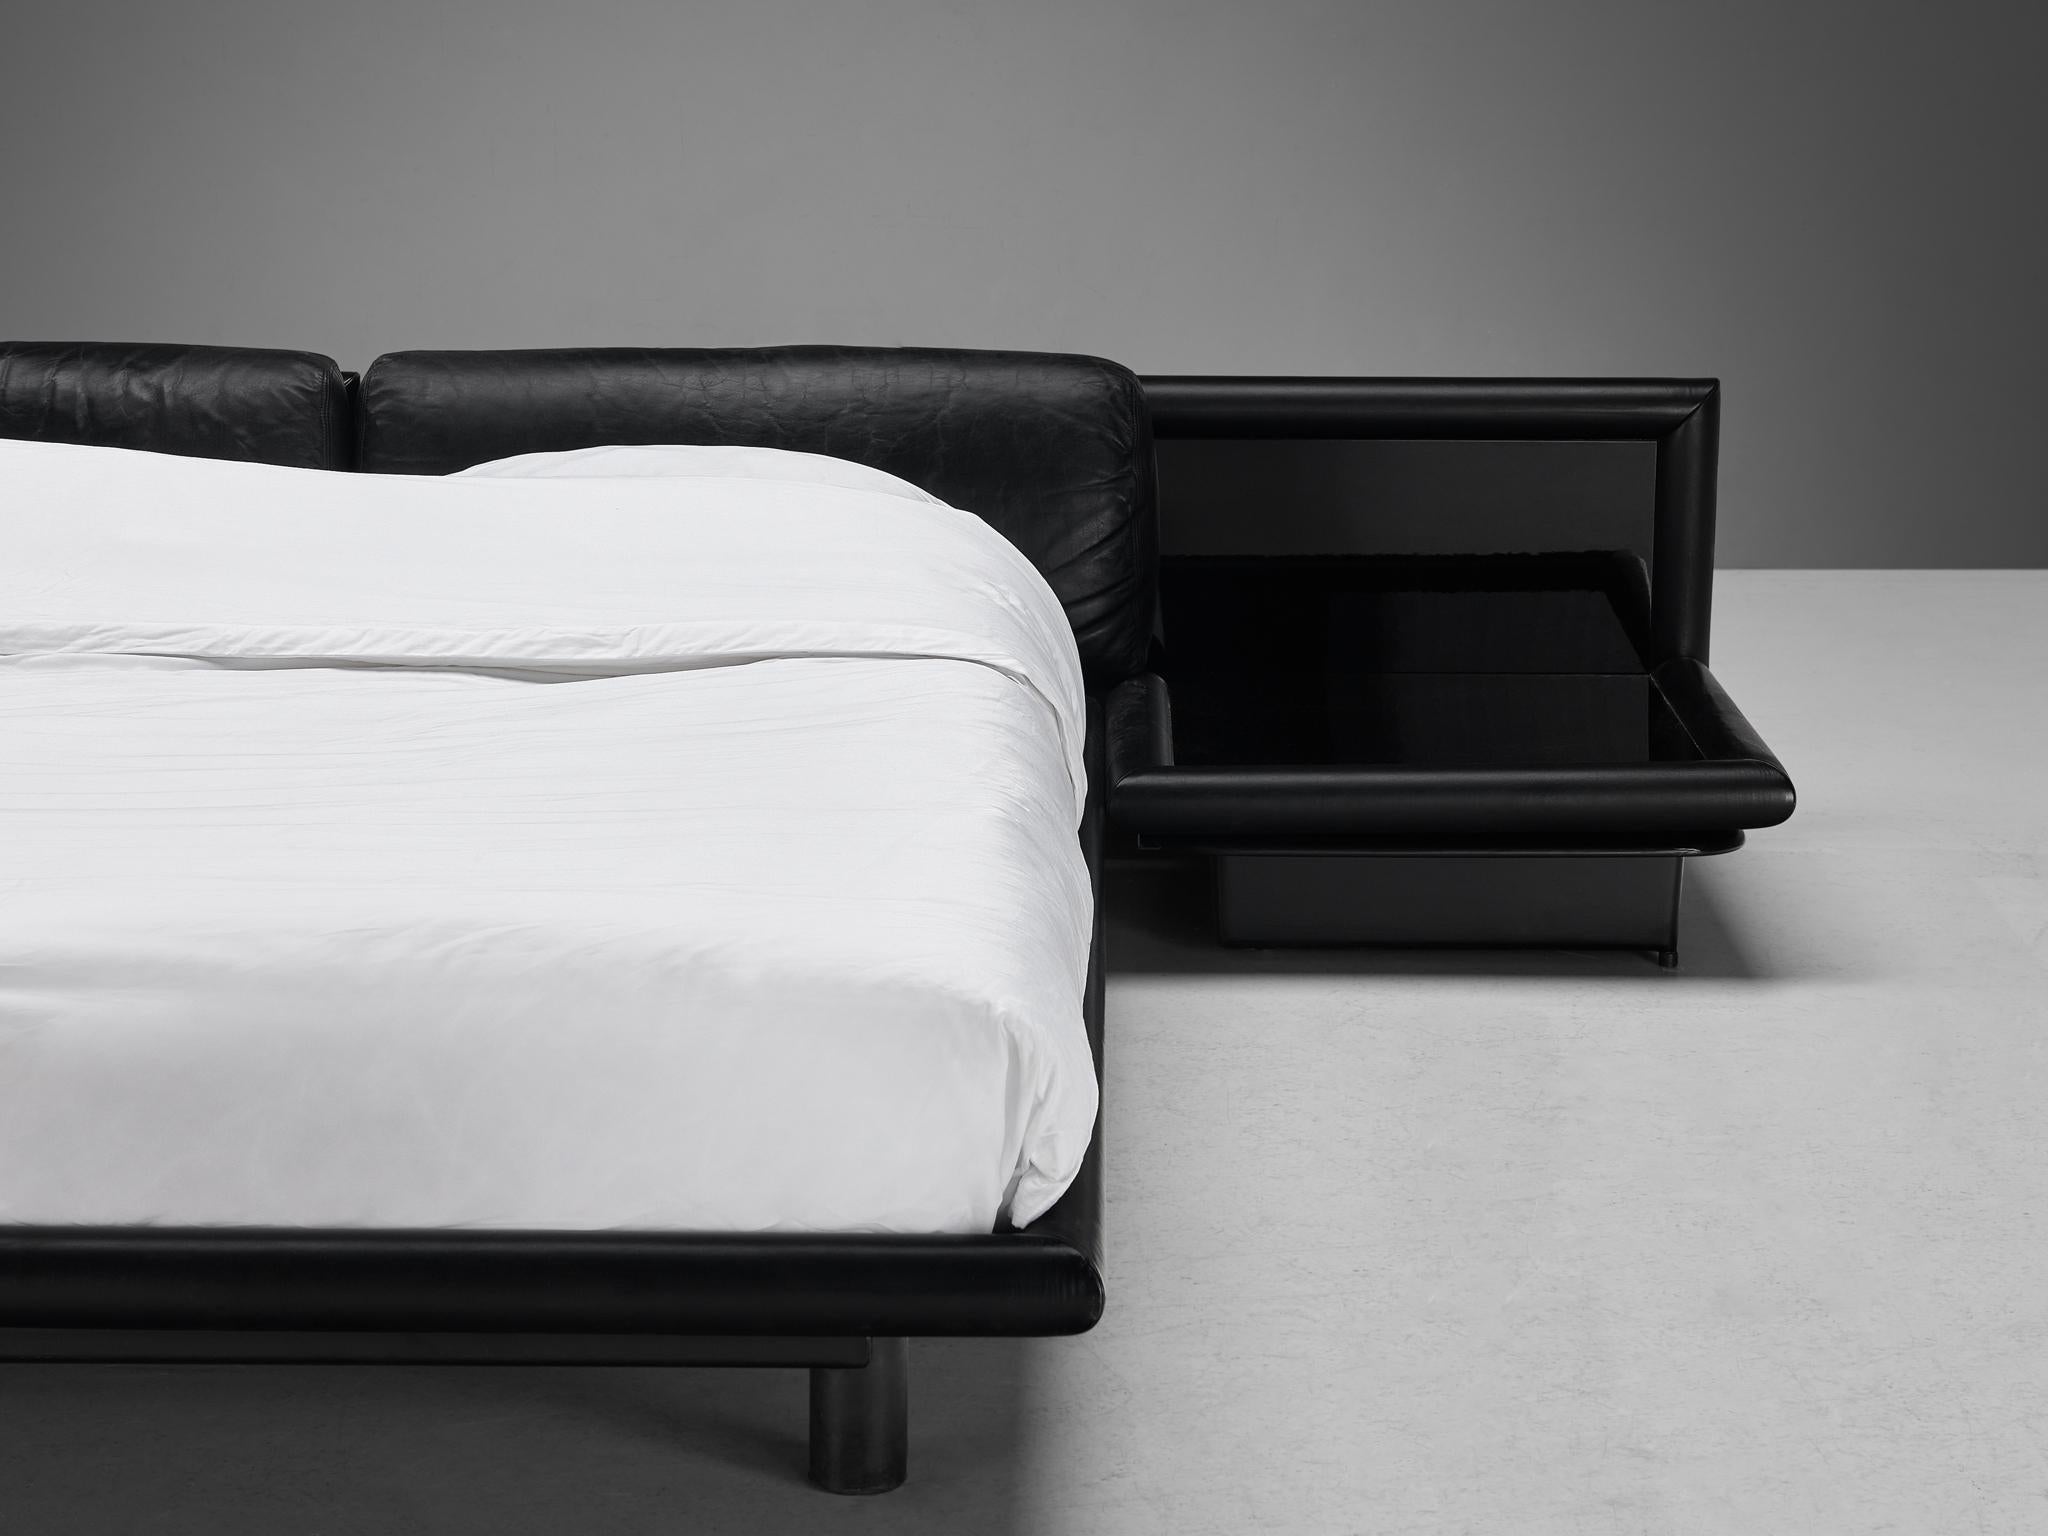 Afra & Tobia Scarpa for Molteni ‘Morna’ Bed with Nightstands